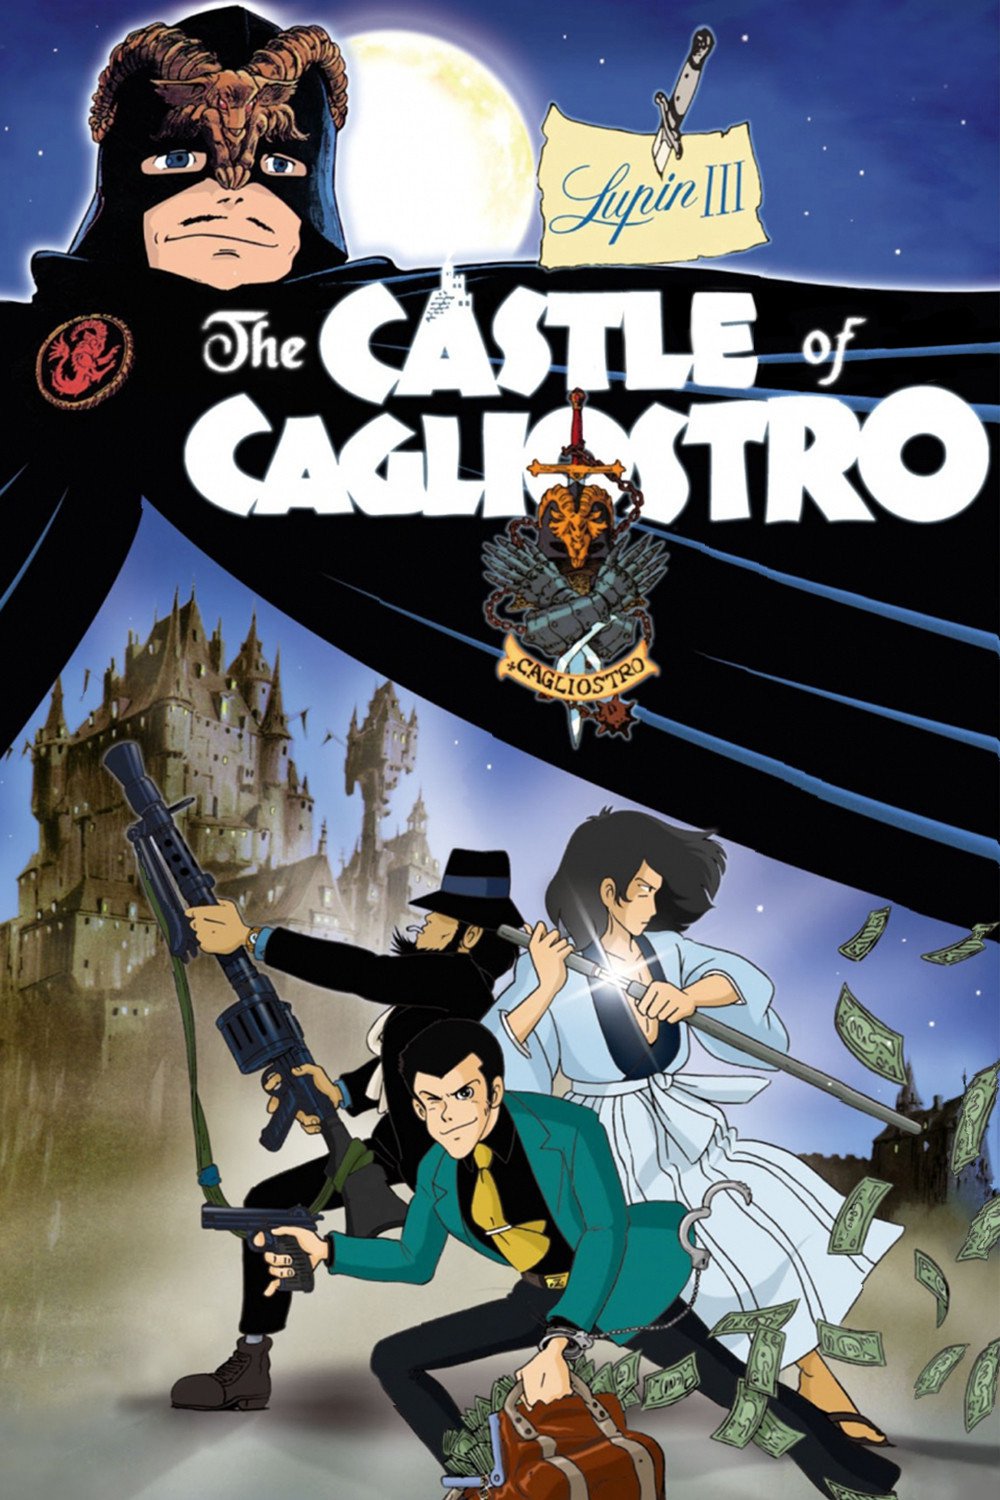 Lupin III: The Castle of Cagliostro Poster